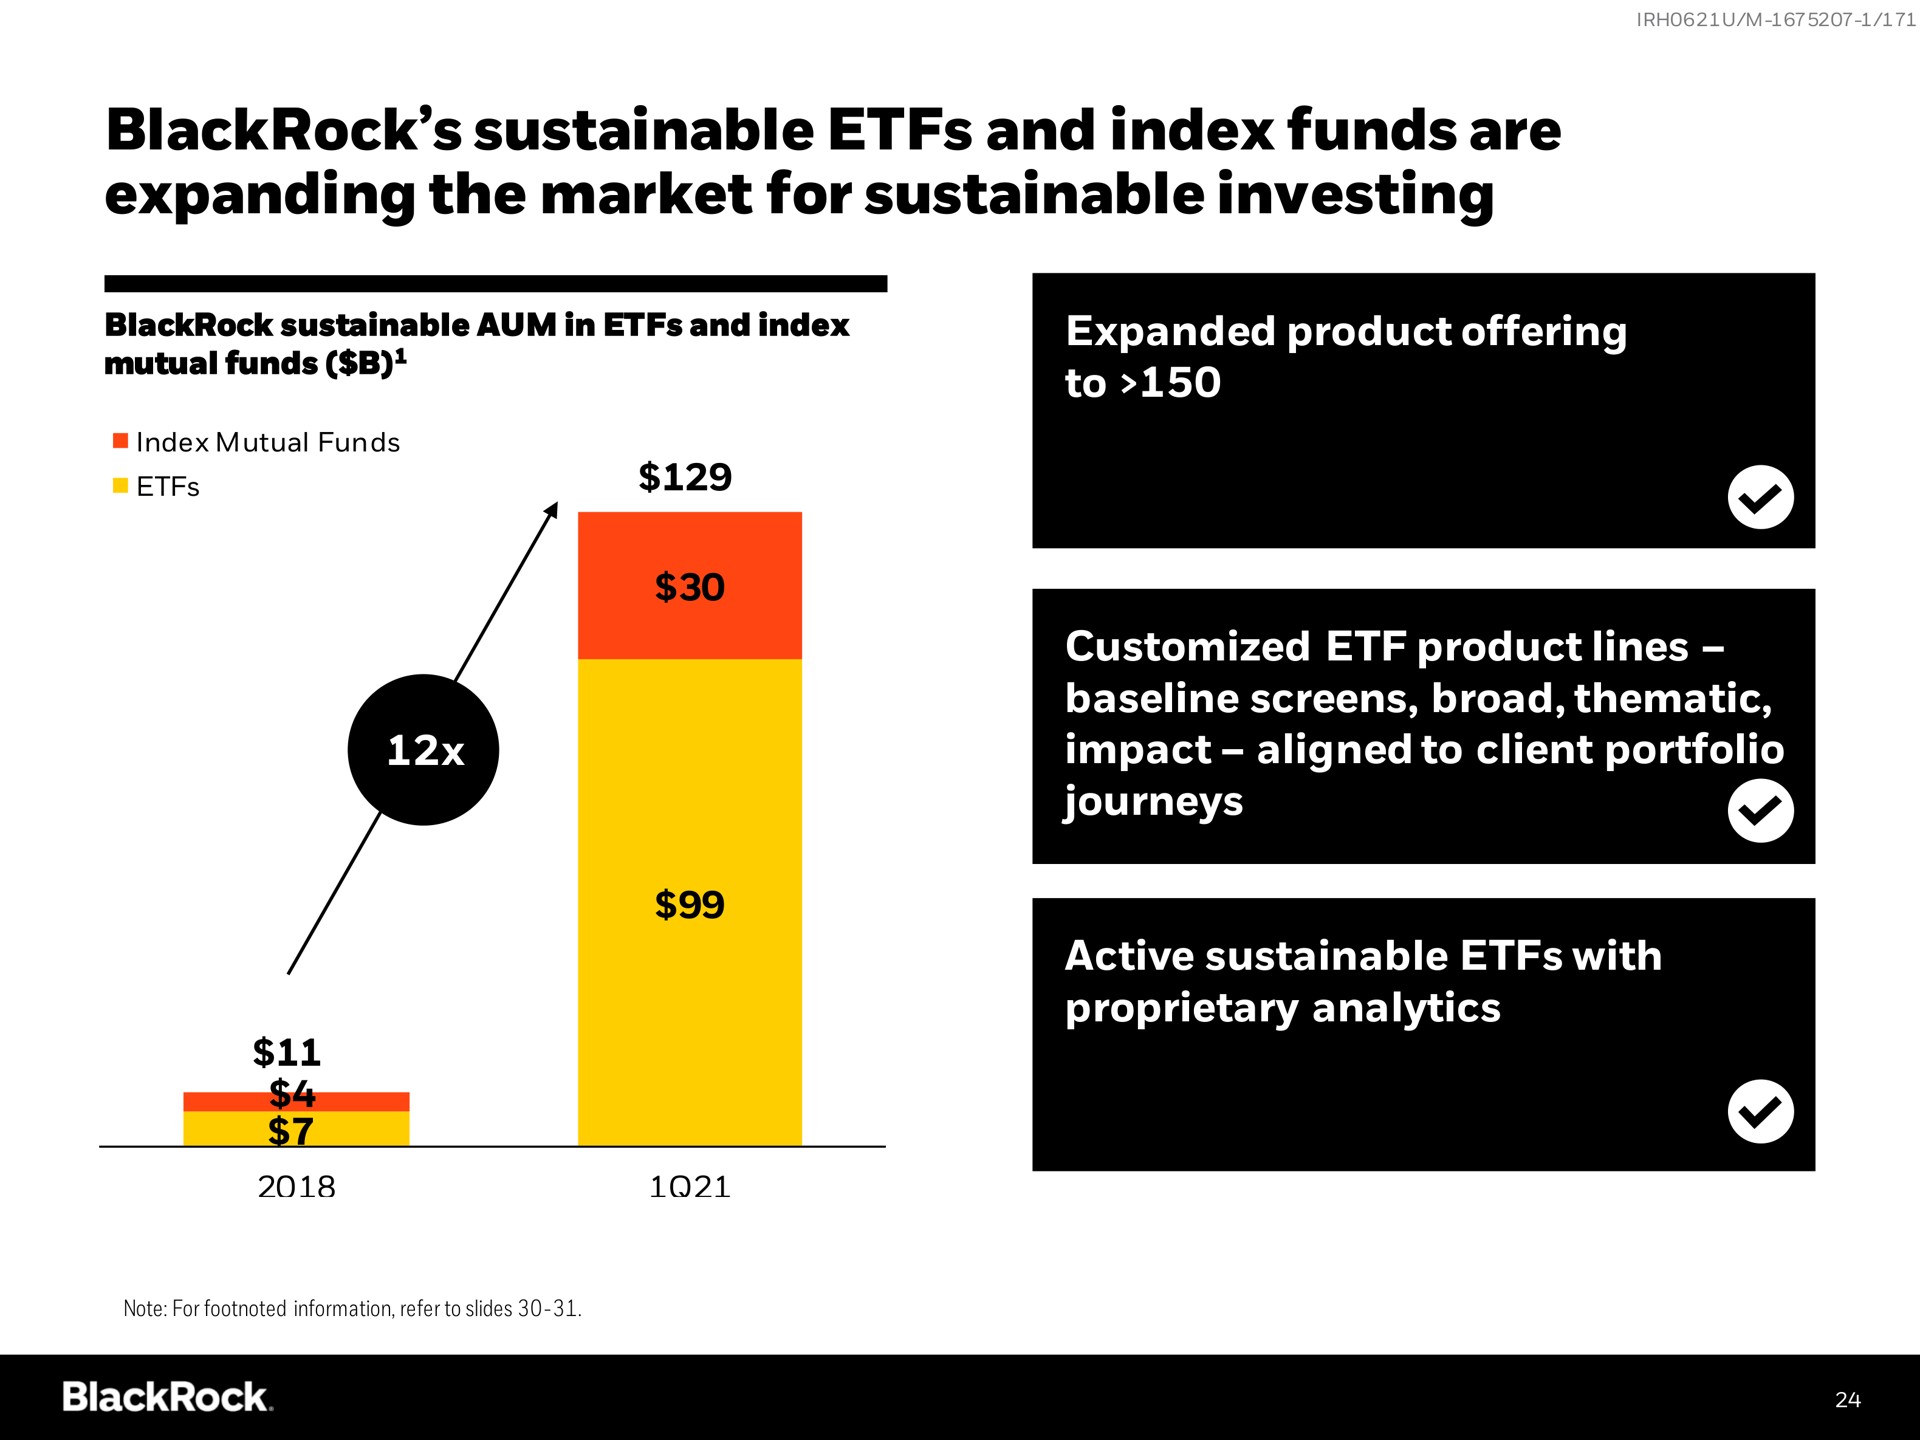 sustainable and index funds are expanding the market for sustainable investing | BlackRock